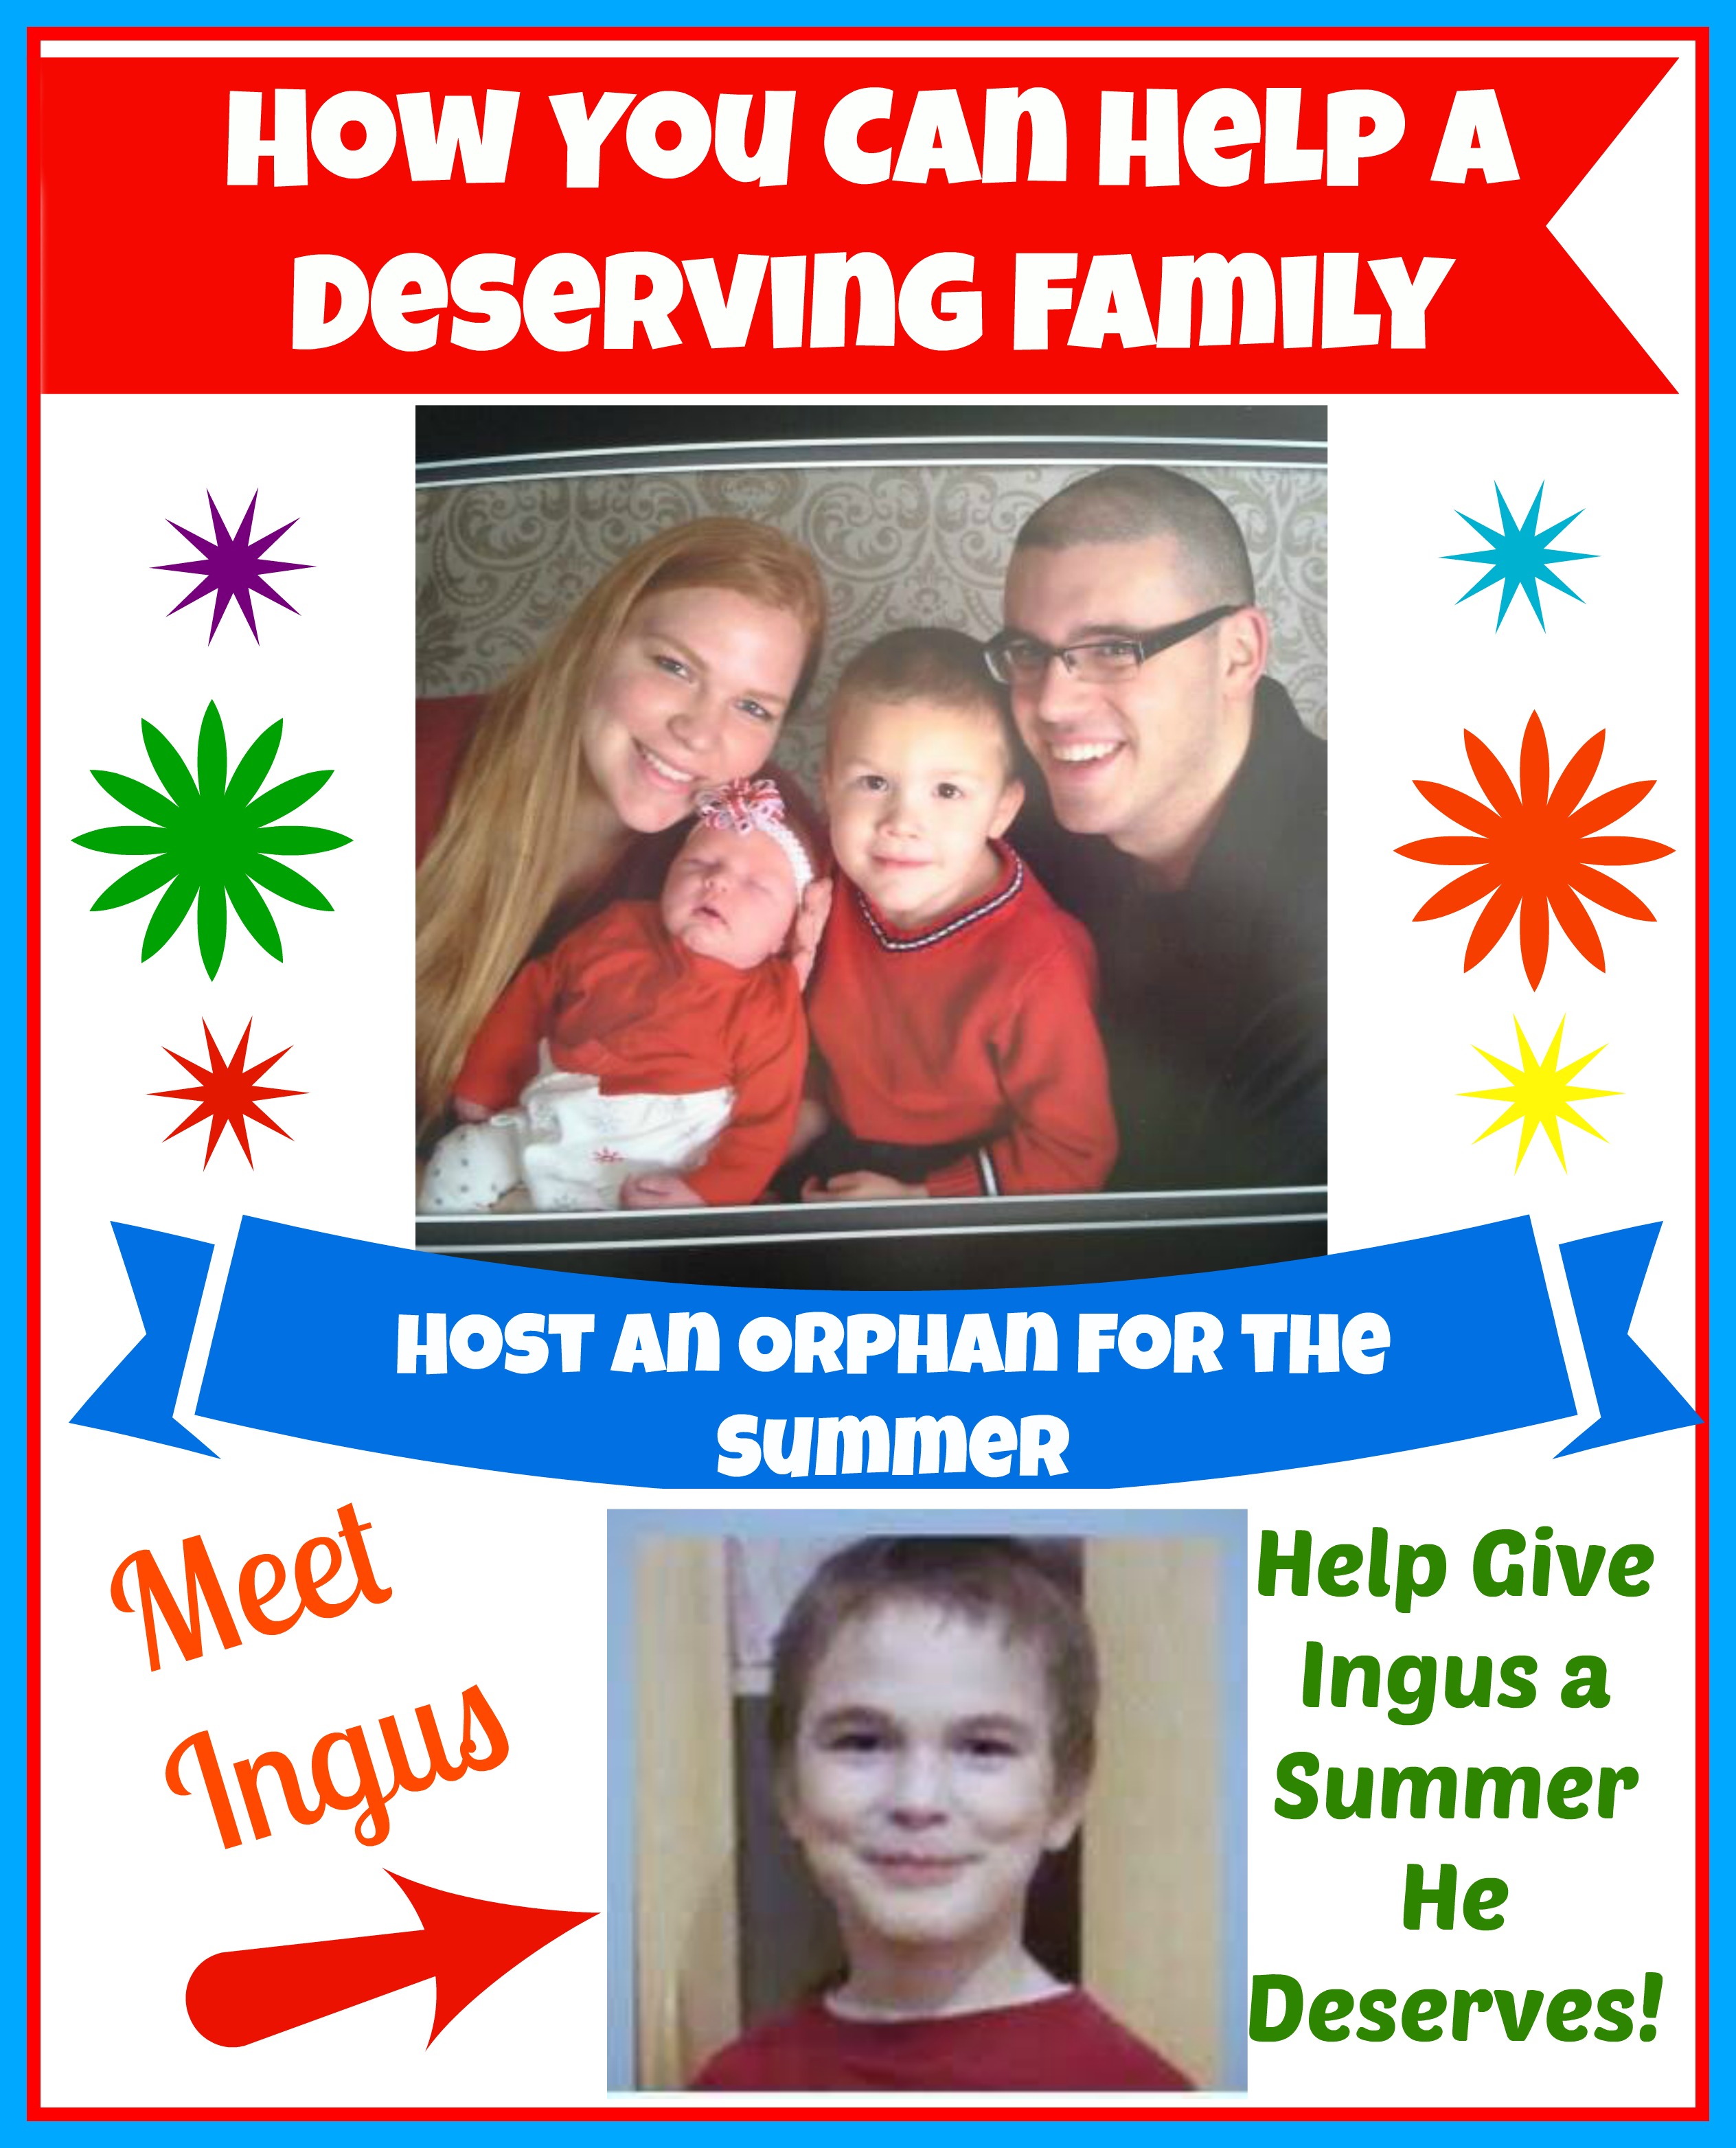 How You Can Help a Deserving Family Host an Orphan for the Summer